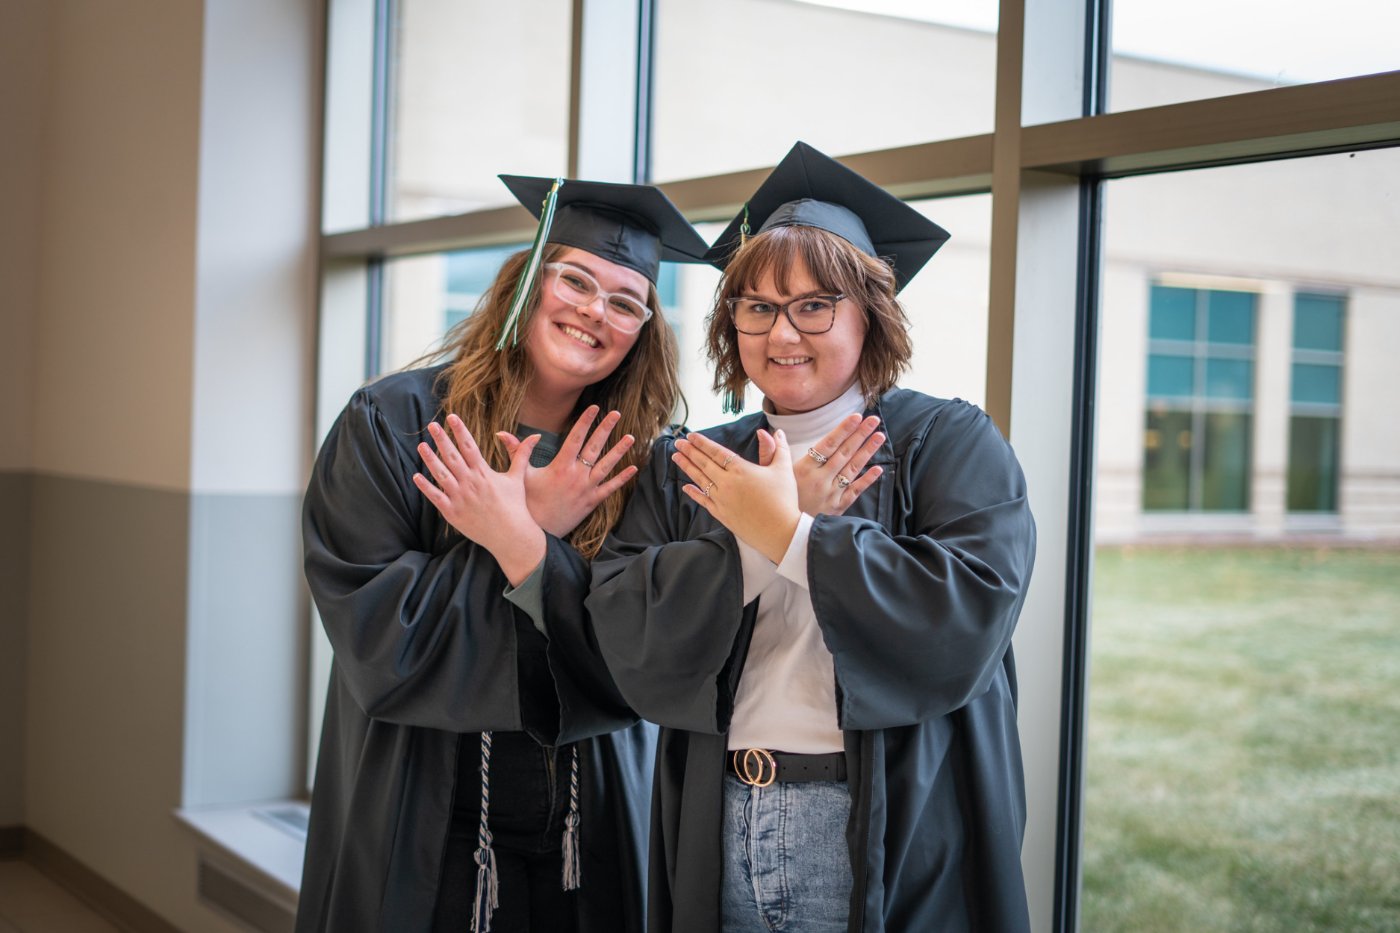 Two students, dressed in their caps and gowns, pose for a photo while creating the signature Phoenix hand gesture.